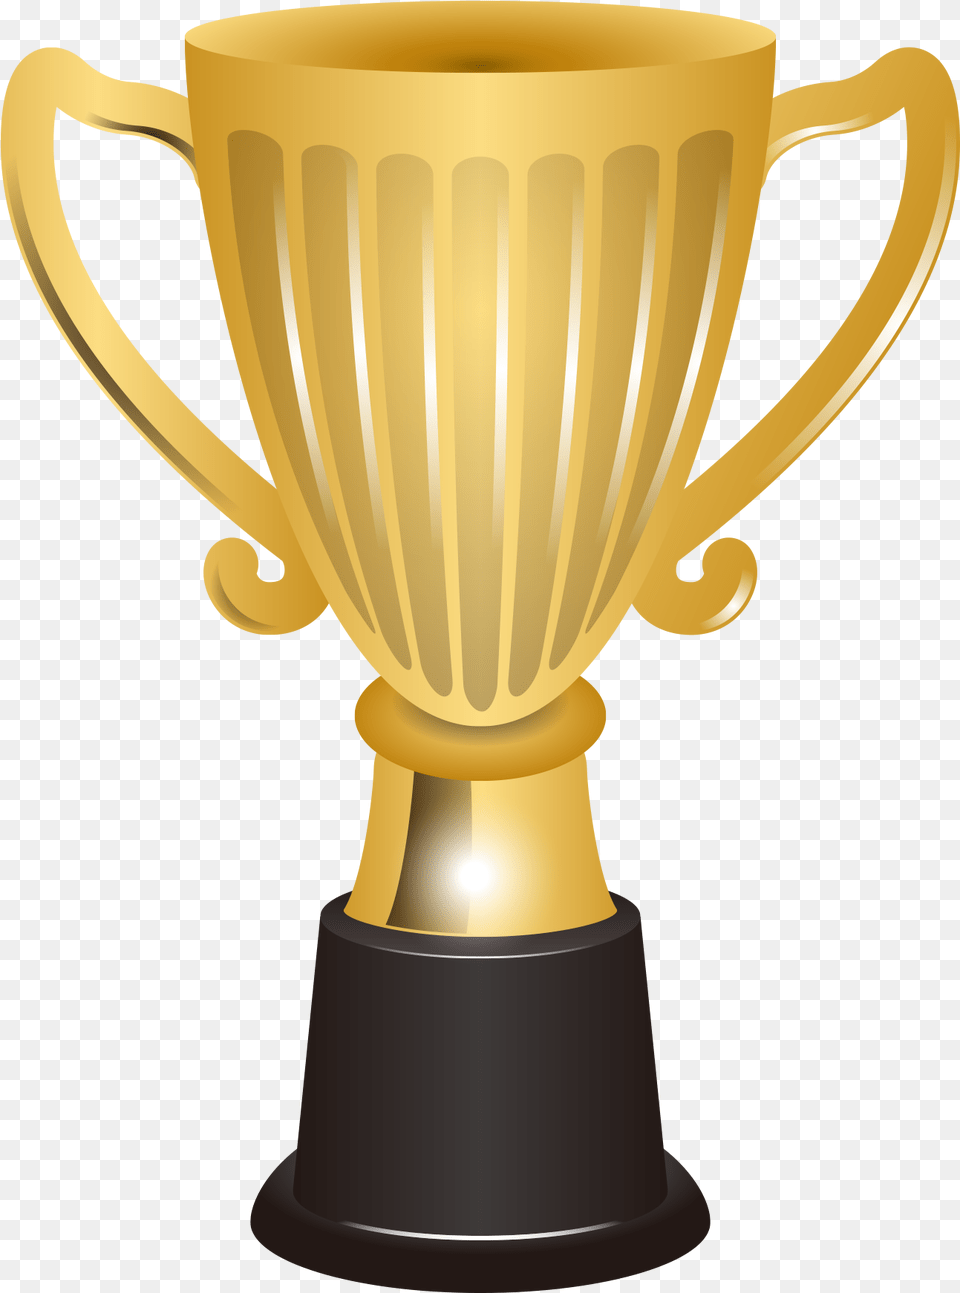 Download Vector Trophy Images, Smoke Pipe Free Png